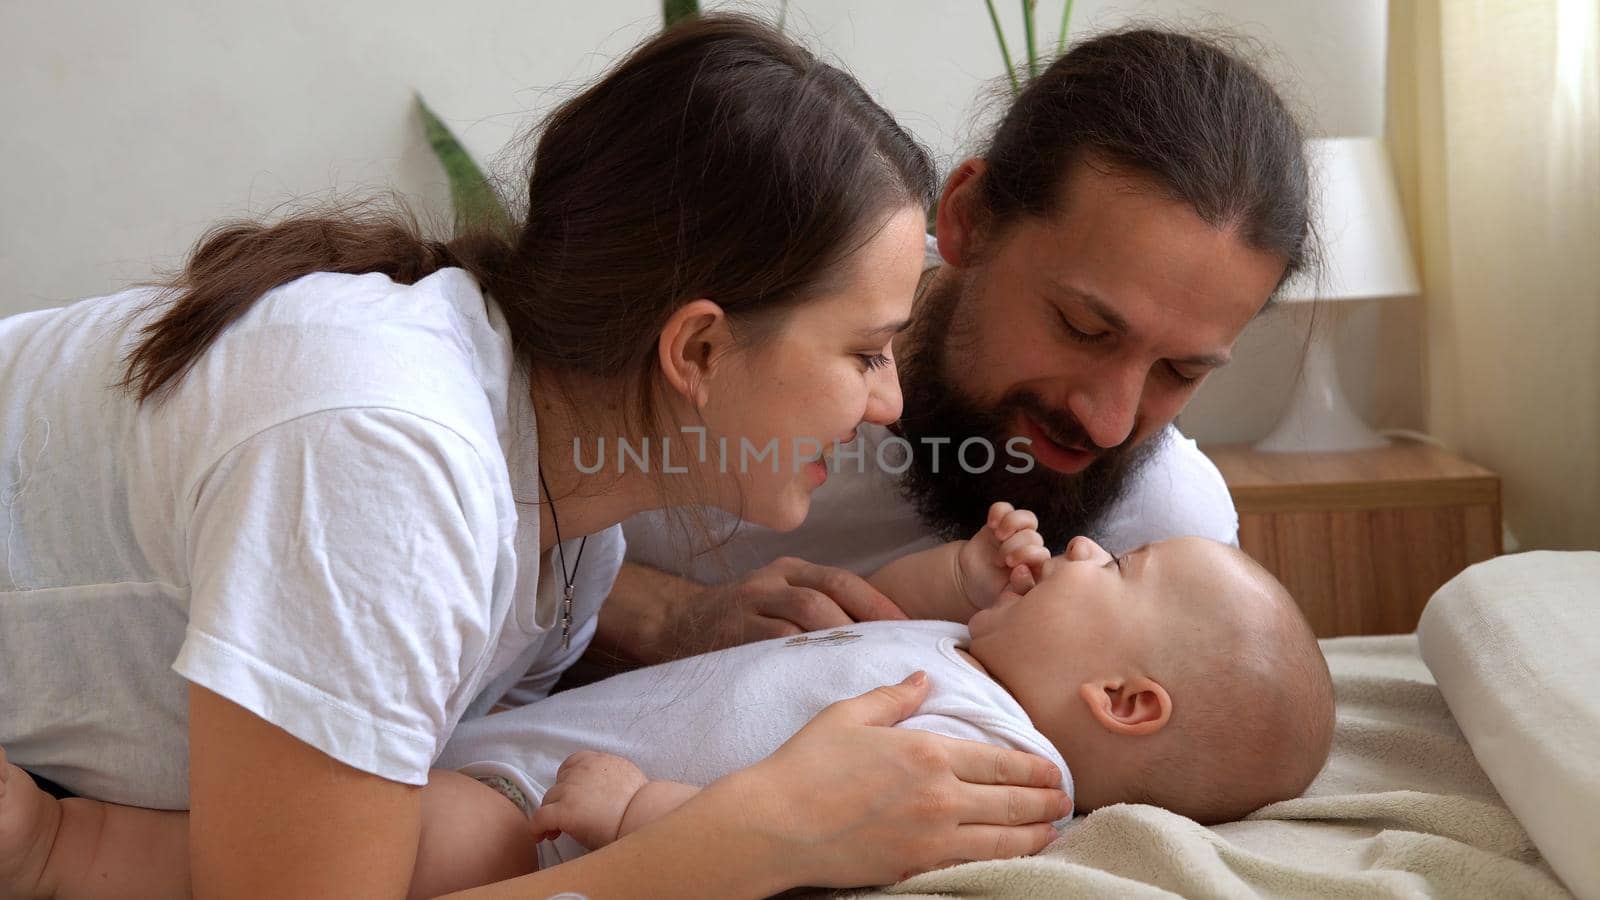 Woman And Man Holding Newborn. Mom, Dad And Baby On Bed. Close-up. Portrait of Young Smiling Family With Newborn On Hands. Happy Marriage Couple On Background. Childhood, Parenthood, Infants Concept.